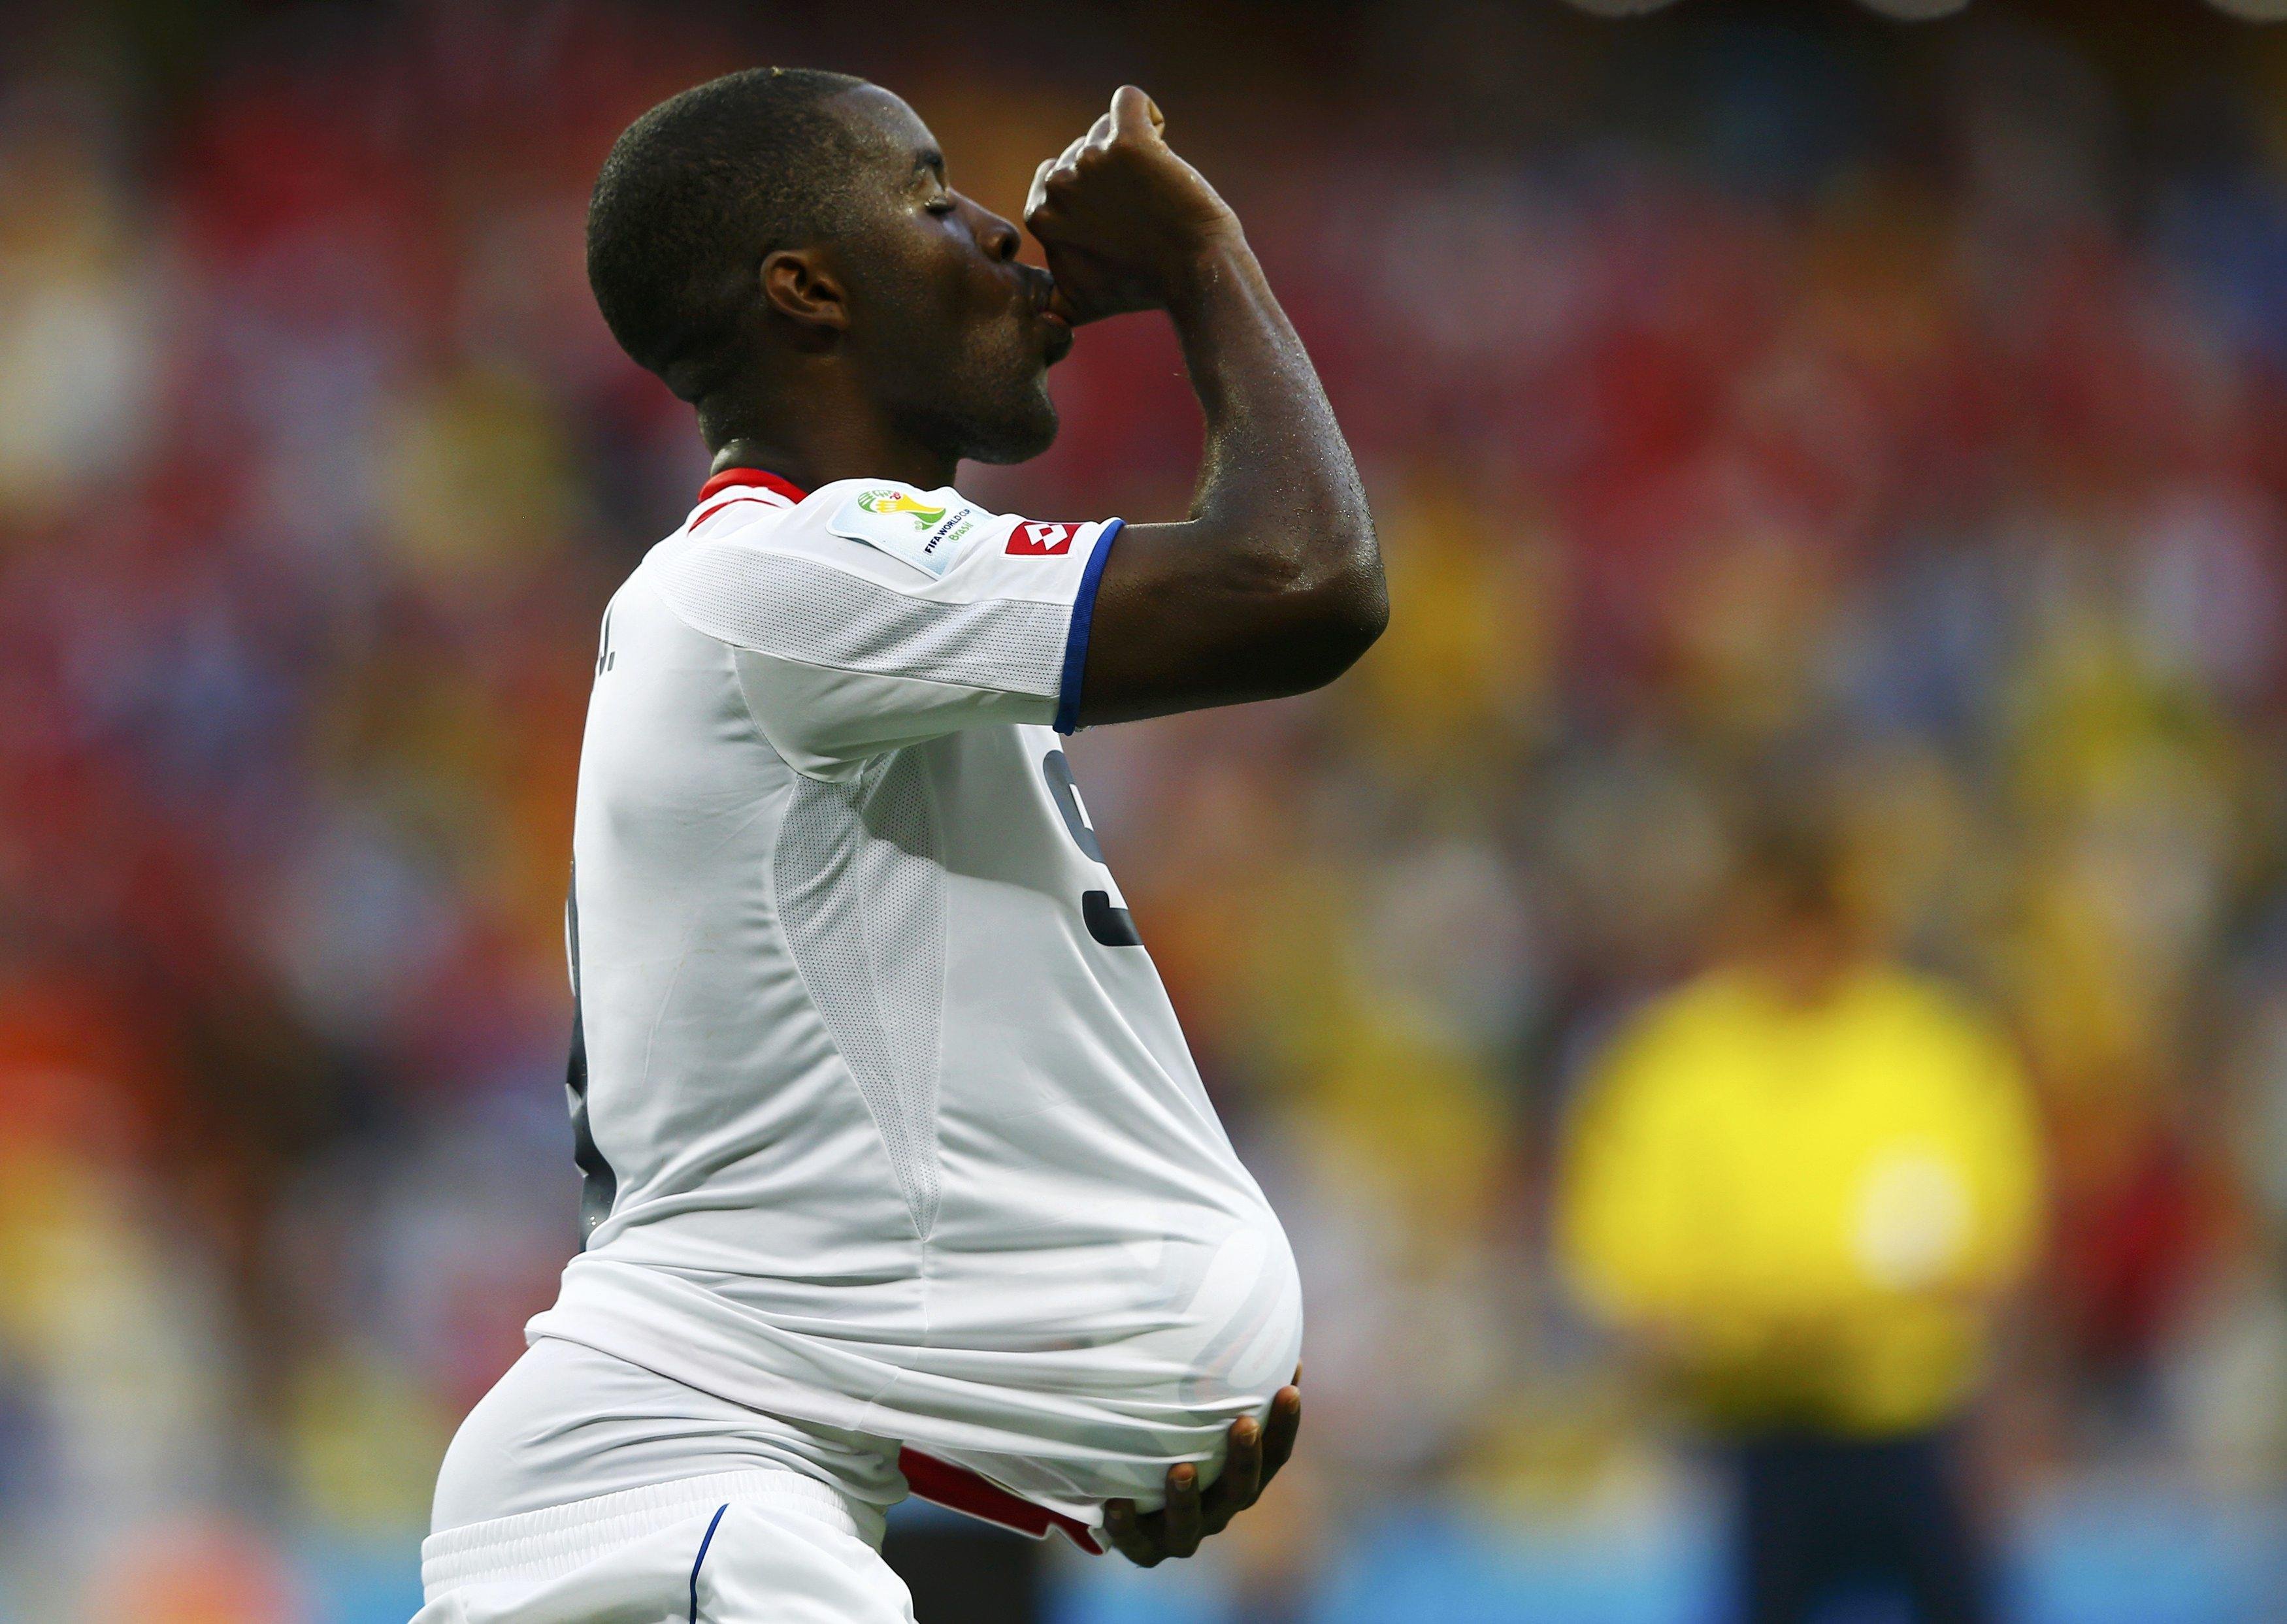 Costa Rica's Joel Campbell celebrates with the match ball after scoring against Uruguay during their 2014 World Cup Group D soccer match at the Castelao stadium in Fortaleza on June 14, 2014.